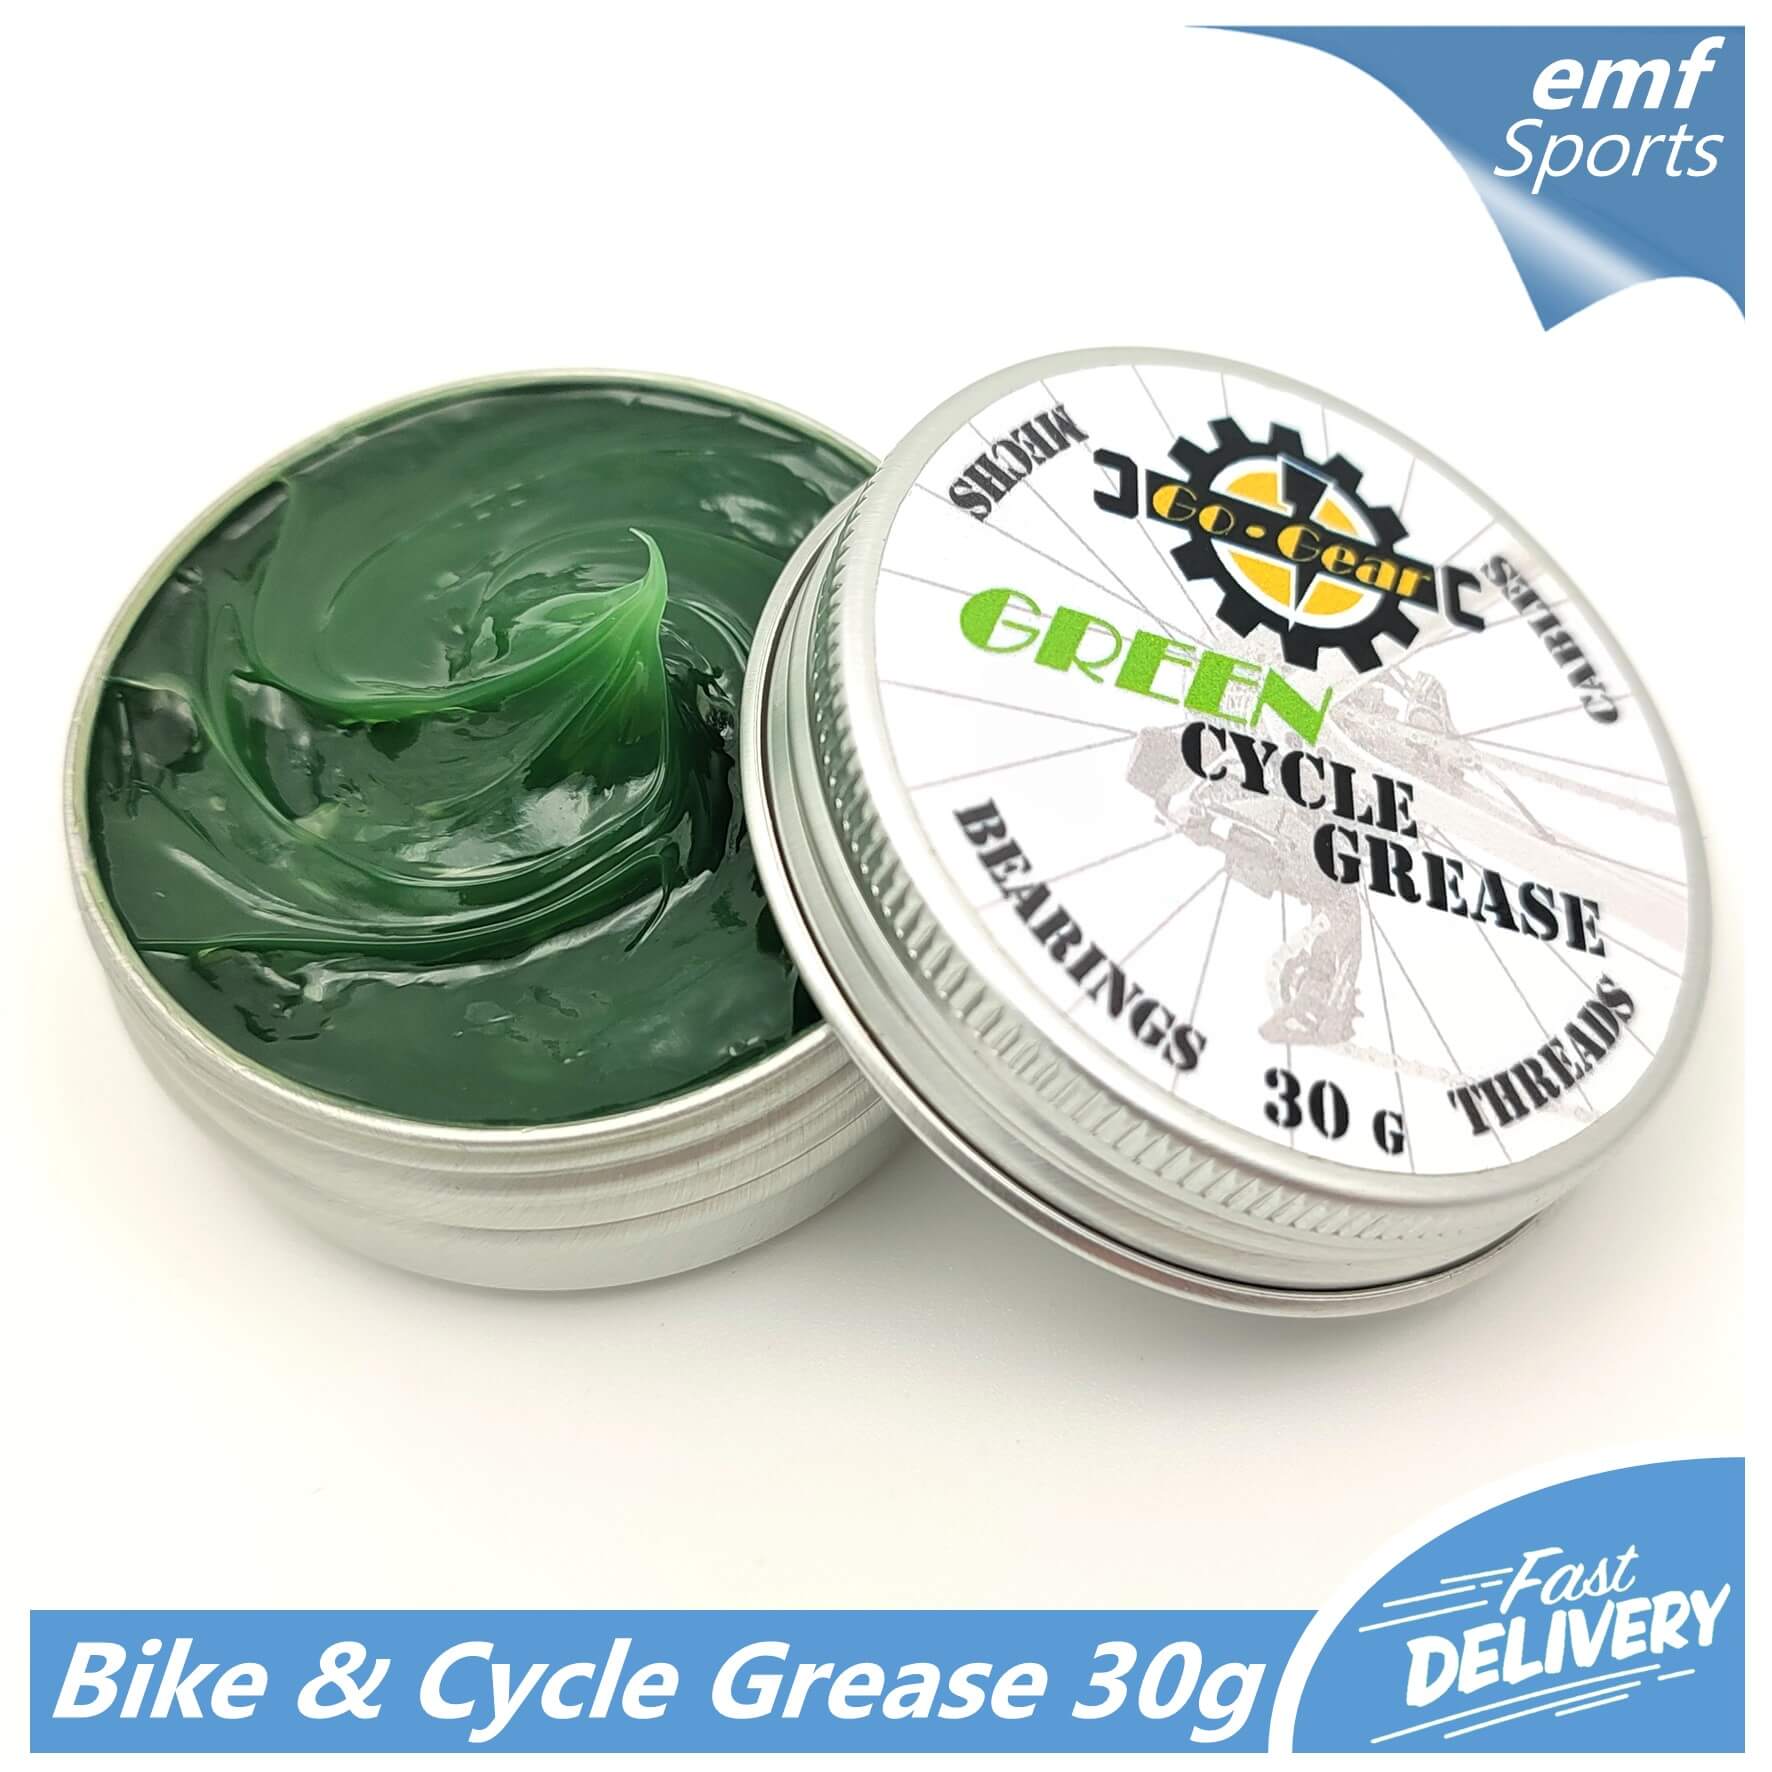 Green Cycle Grease Lubricant For Bike Gears, Bearings & Threads 30g